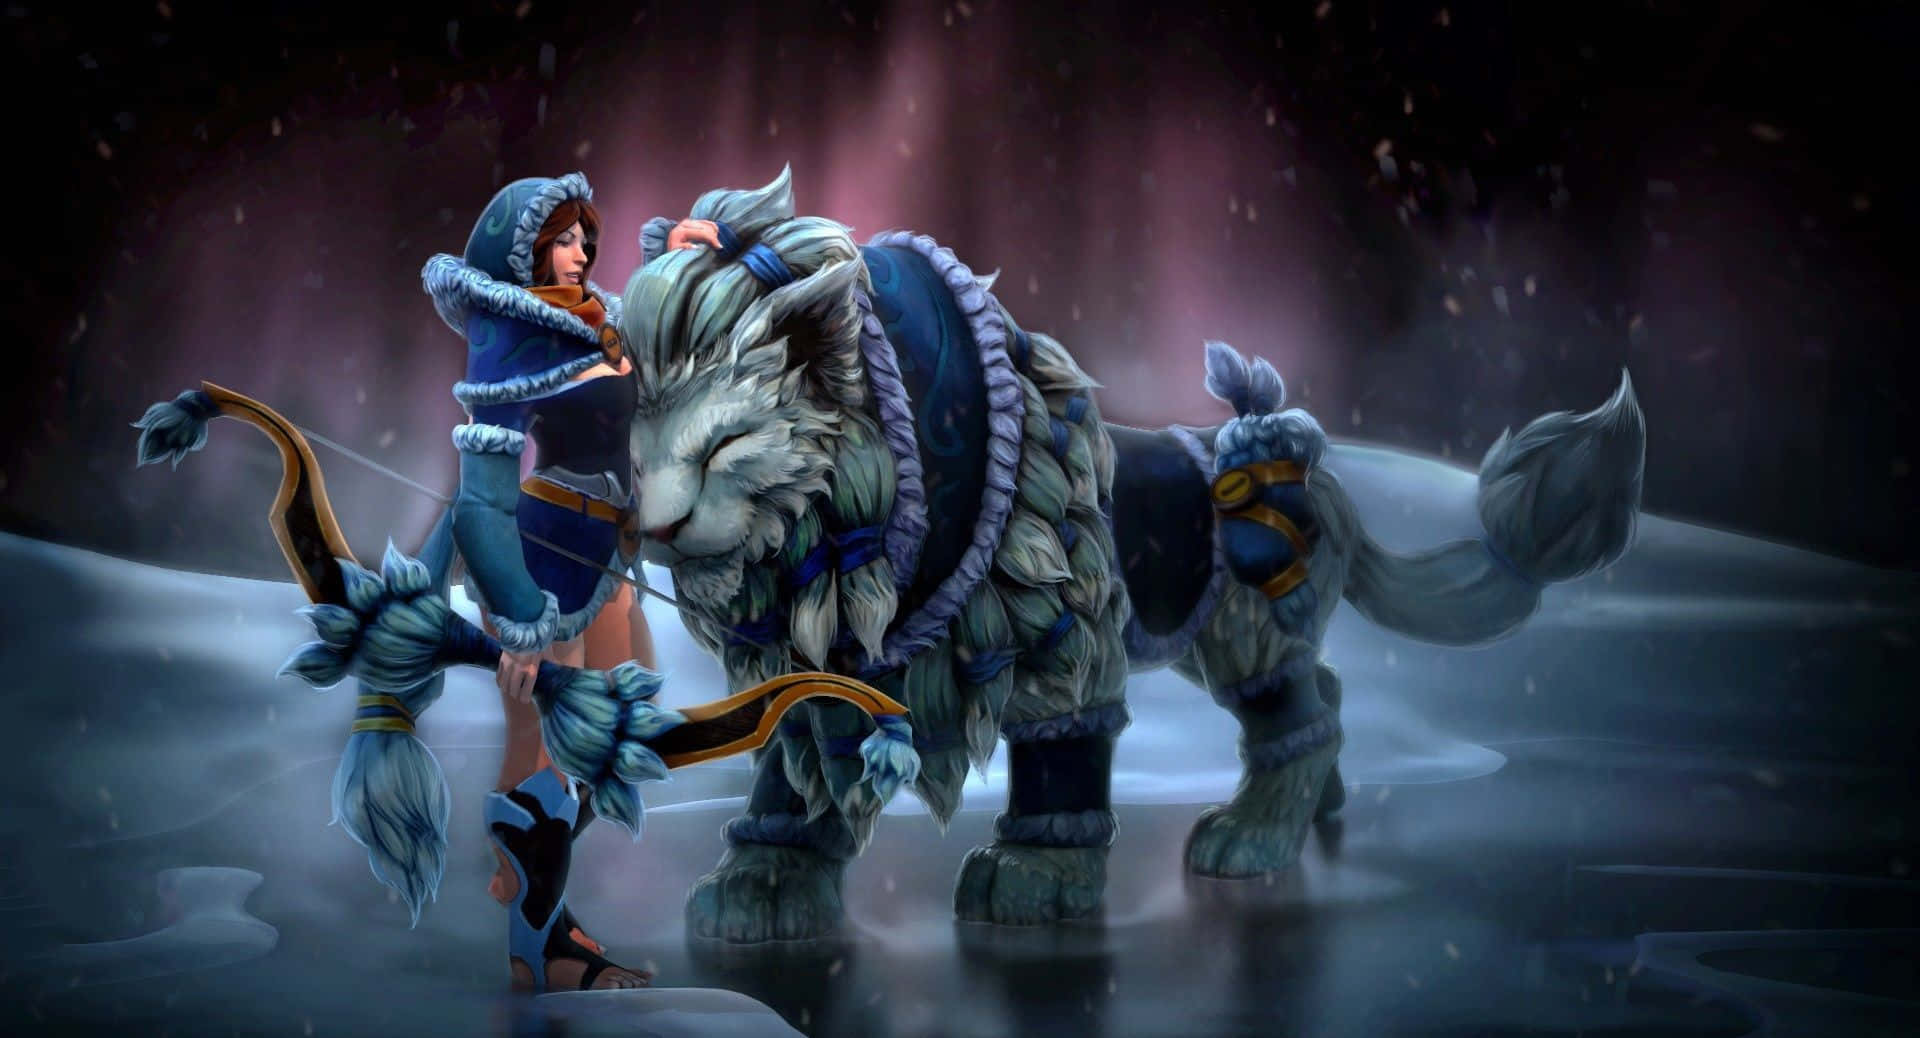 Mirana the Princess of the Moon in action Wallpaper